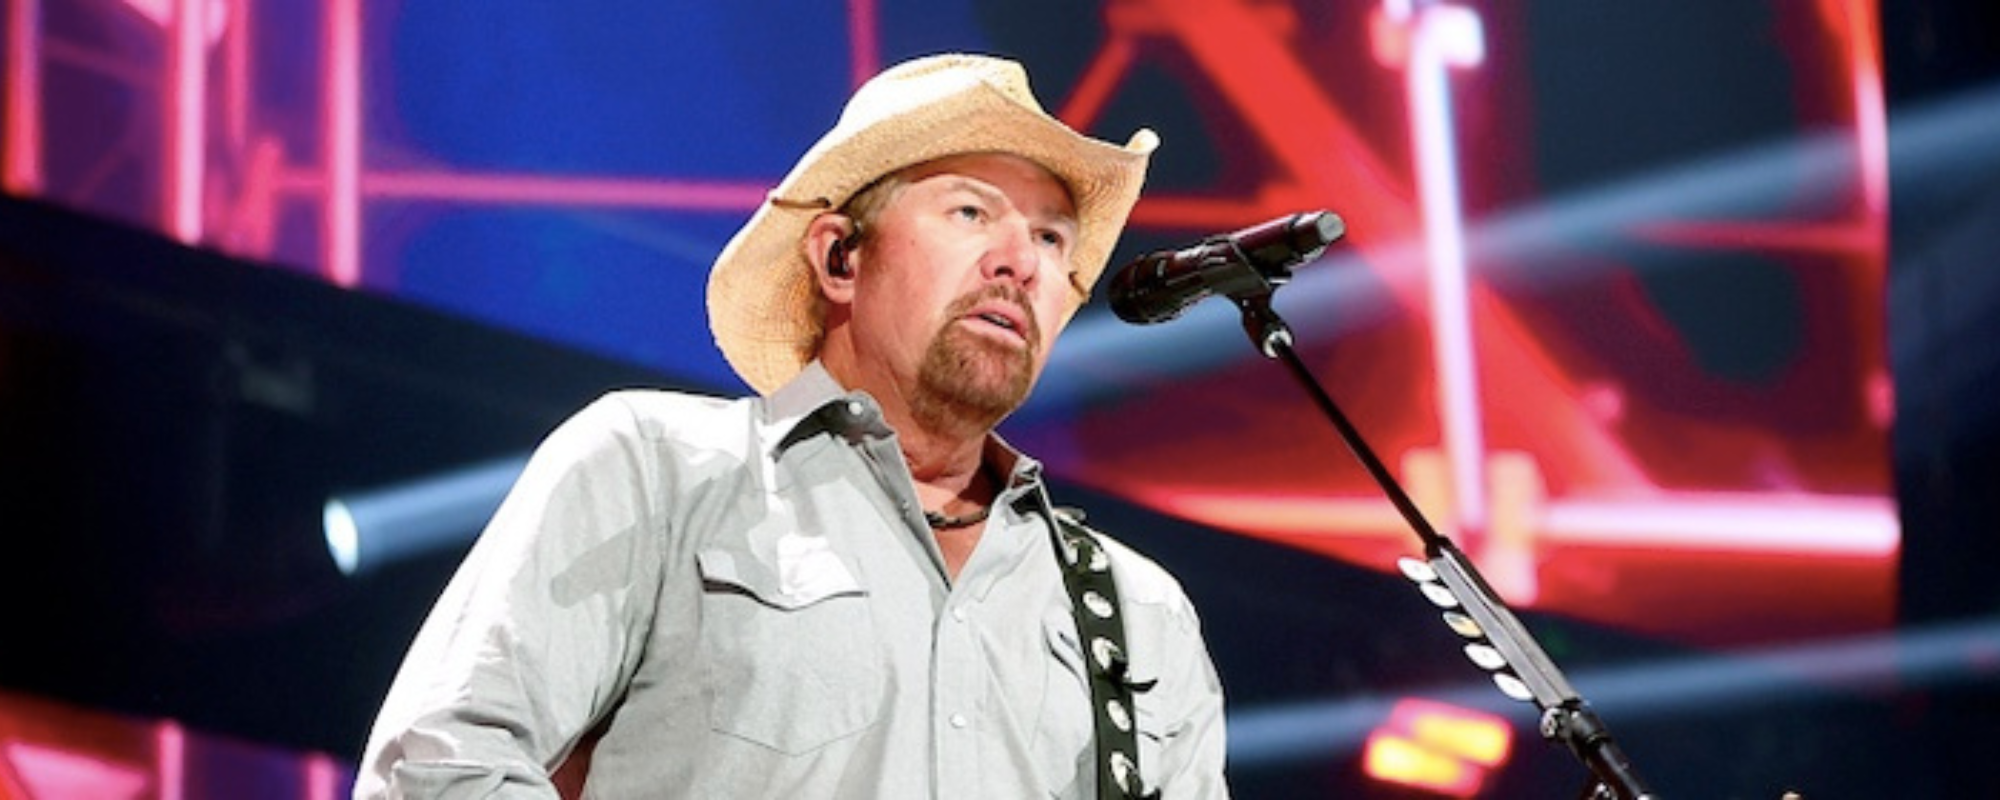 Toby Keith’s New Album ‘100% Songwriter’ Has Arrived